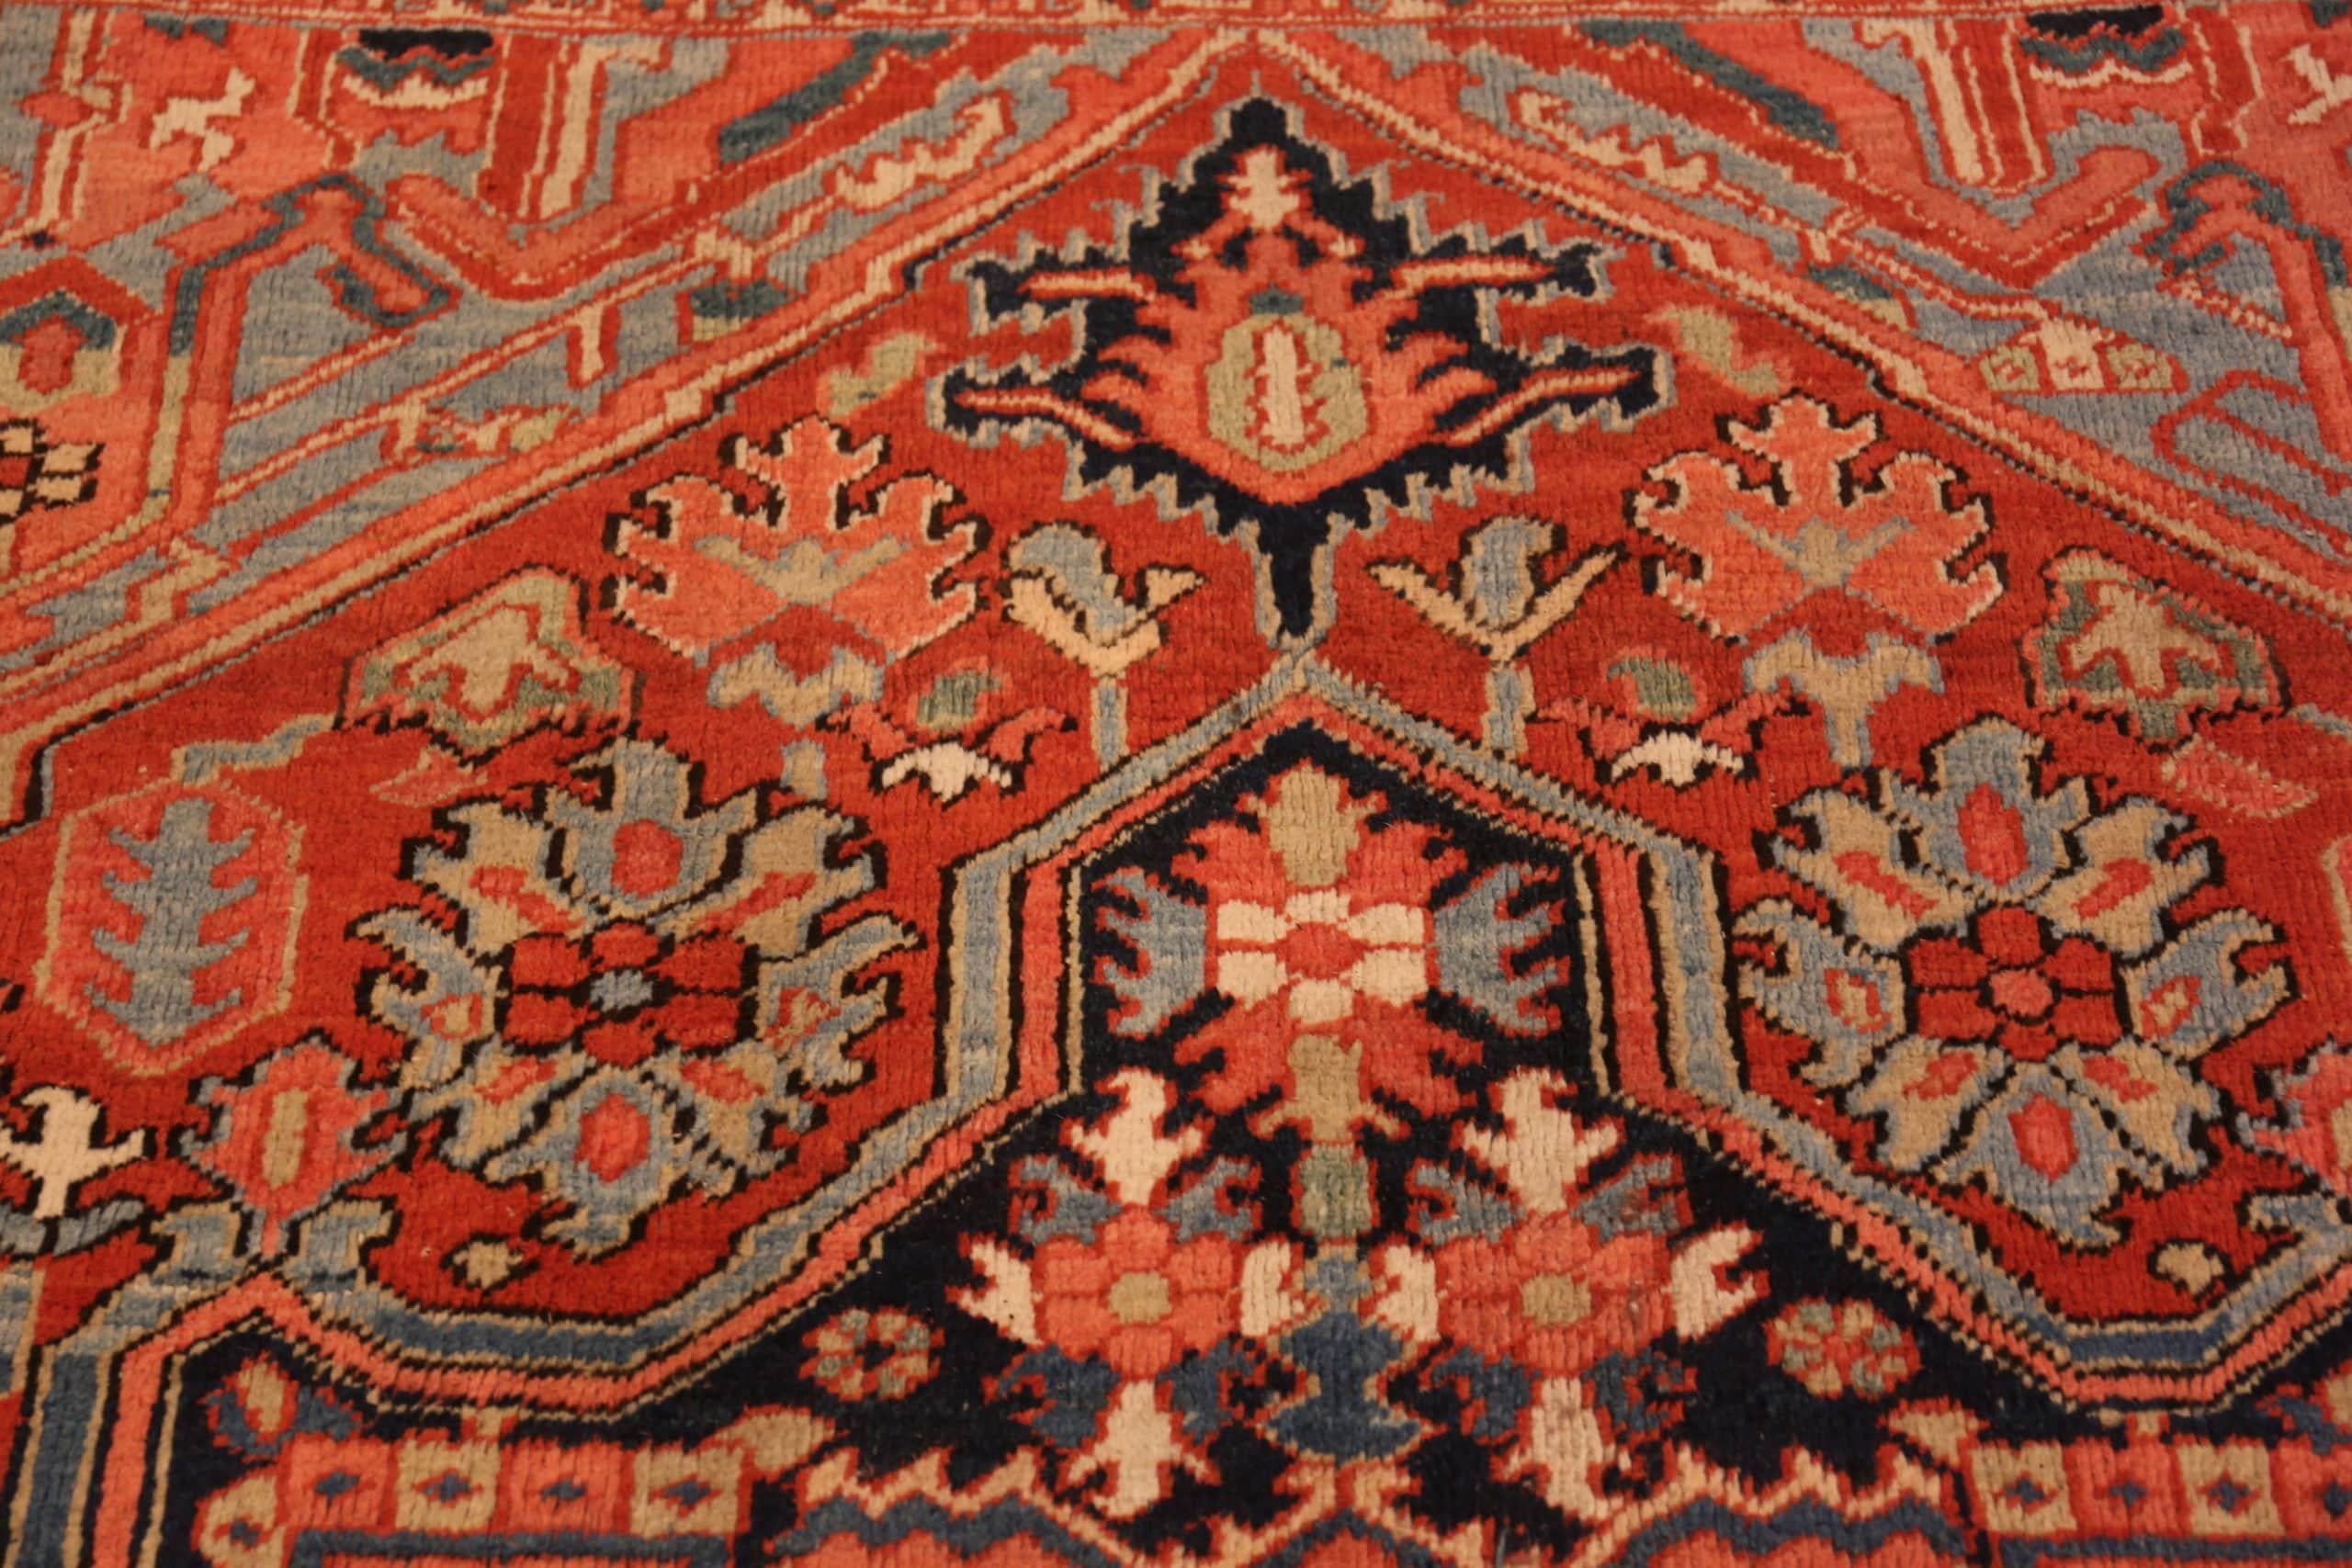 Hand-Knotted Small Antique Persian Heriz Rug. Size: 6 ft 5 in x 8 ft